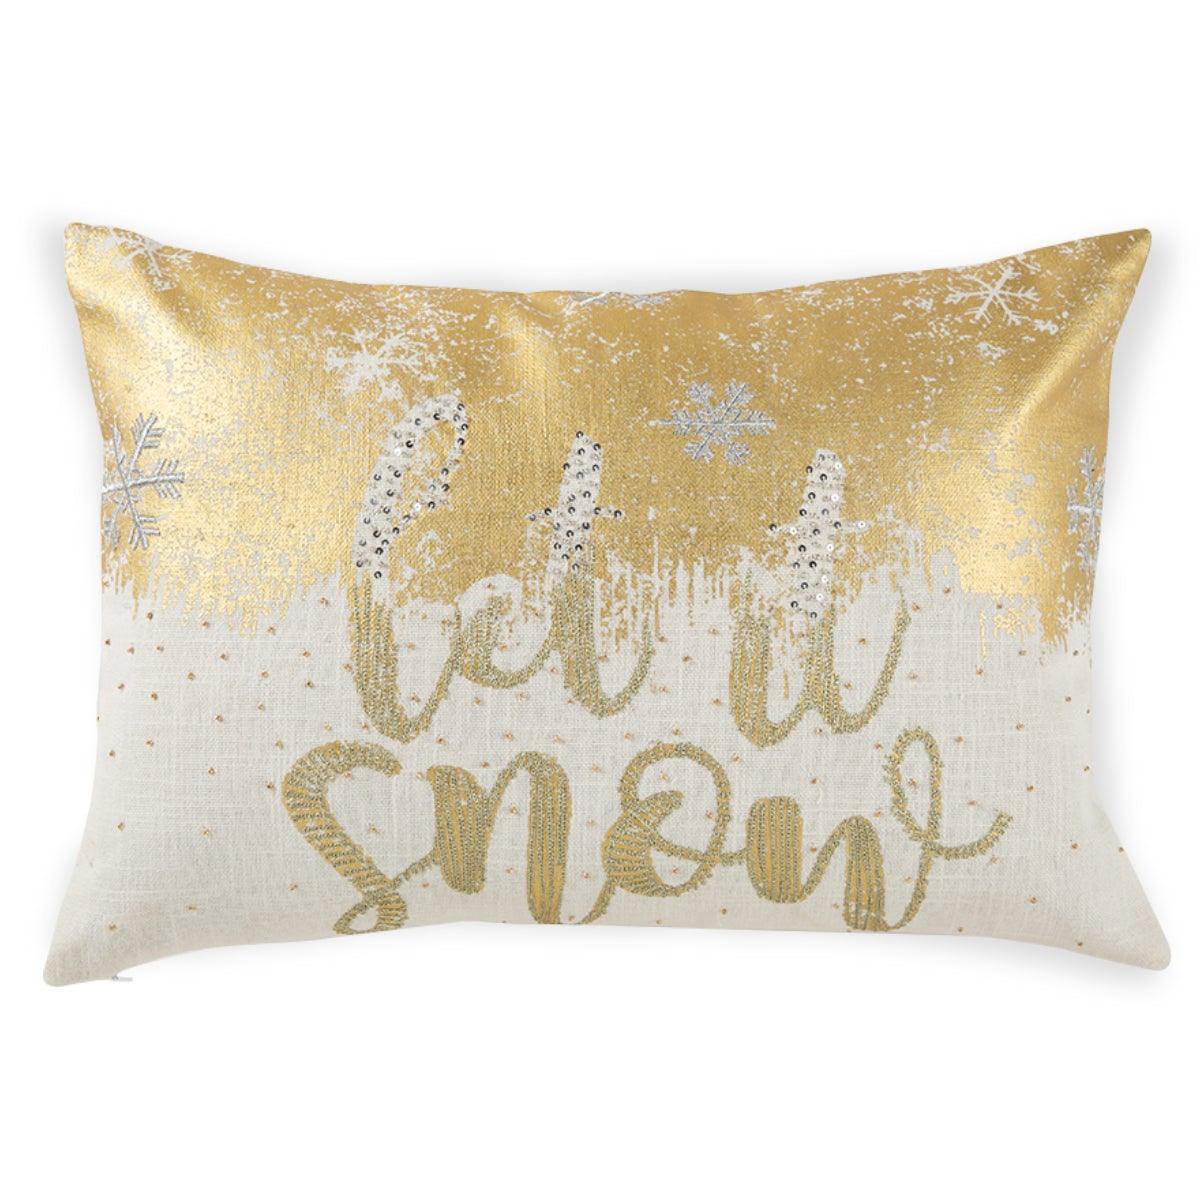 Let It Snow Cushion Cover - Home4u